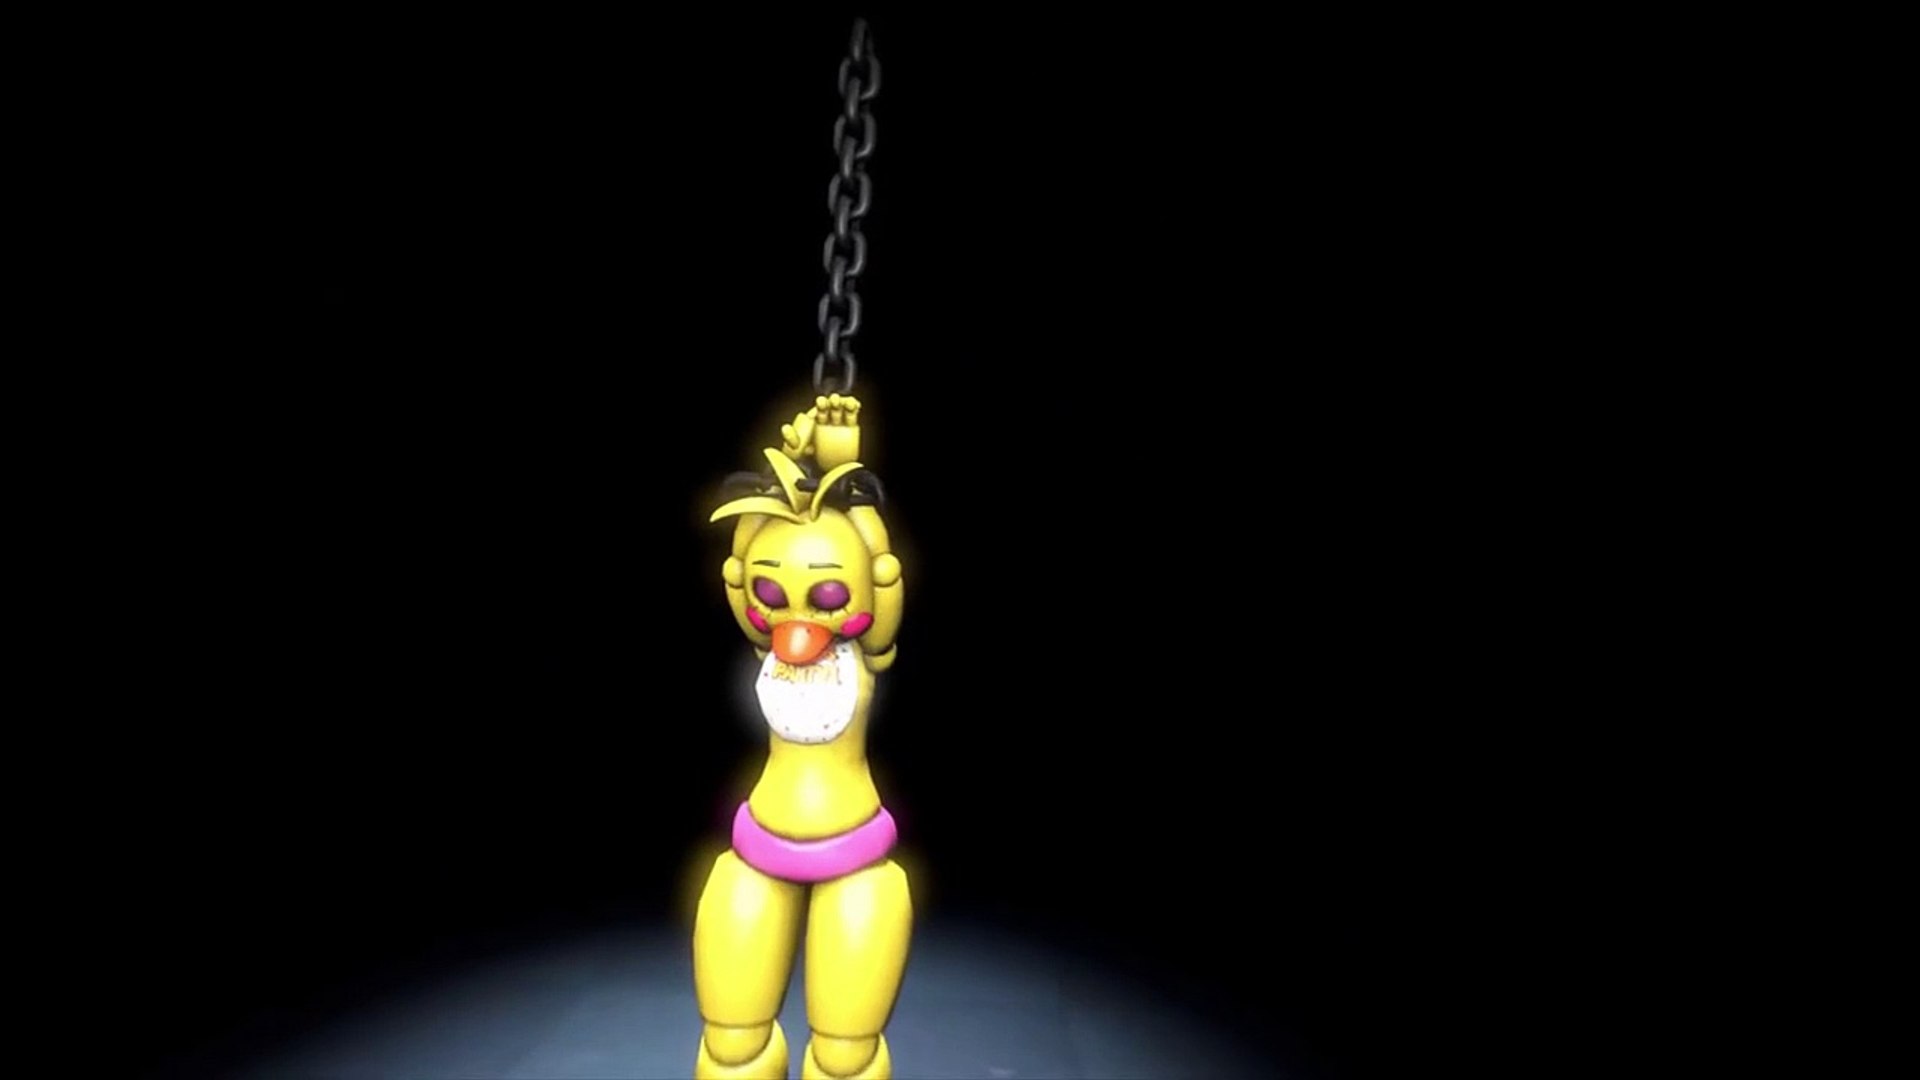 FNAF Story: Toy Chica Meets Shadow by AskBenDrownedOrRake on